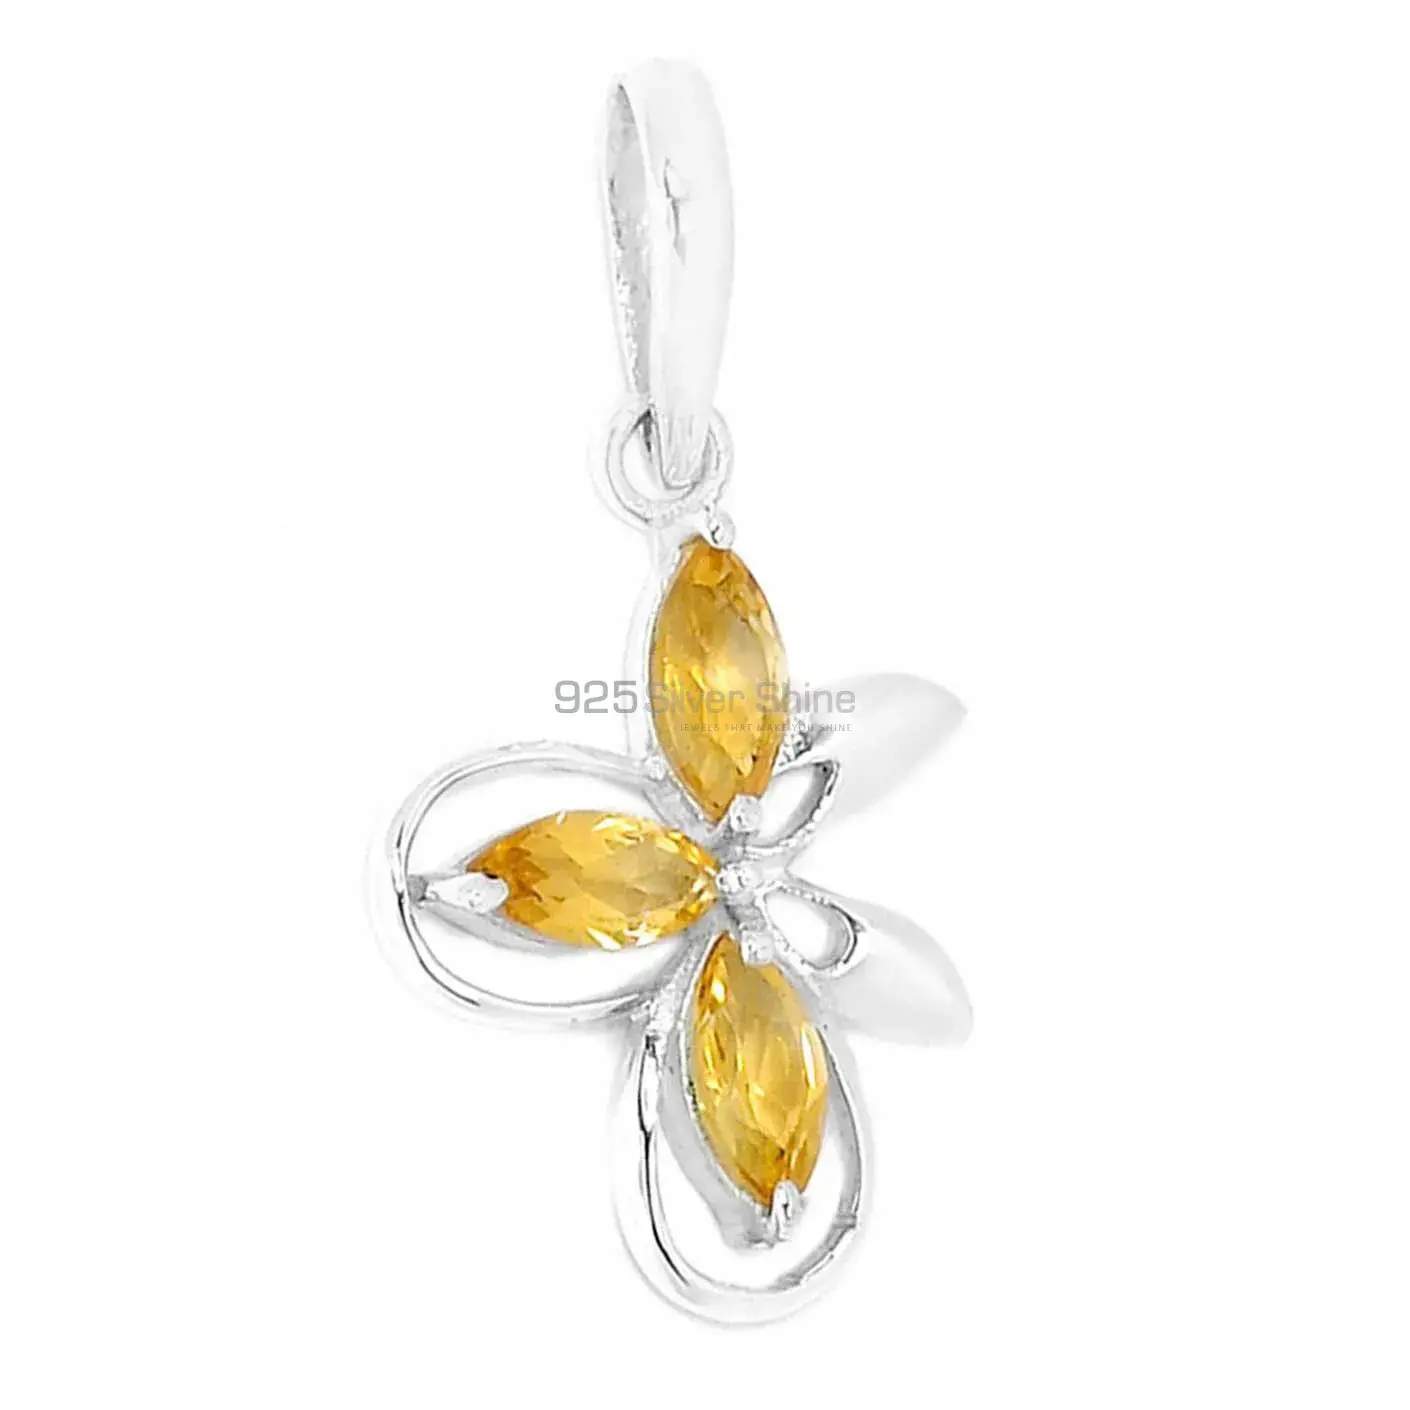 Top Quality 925 Sterling Silver Handmade Pendants In Citrine Gemstone Jewelry 925SP292-5_0